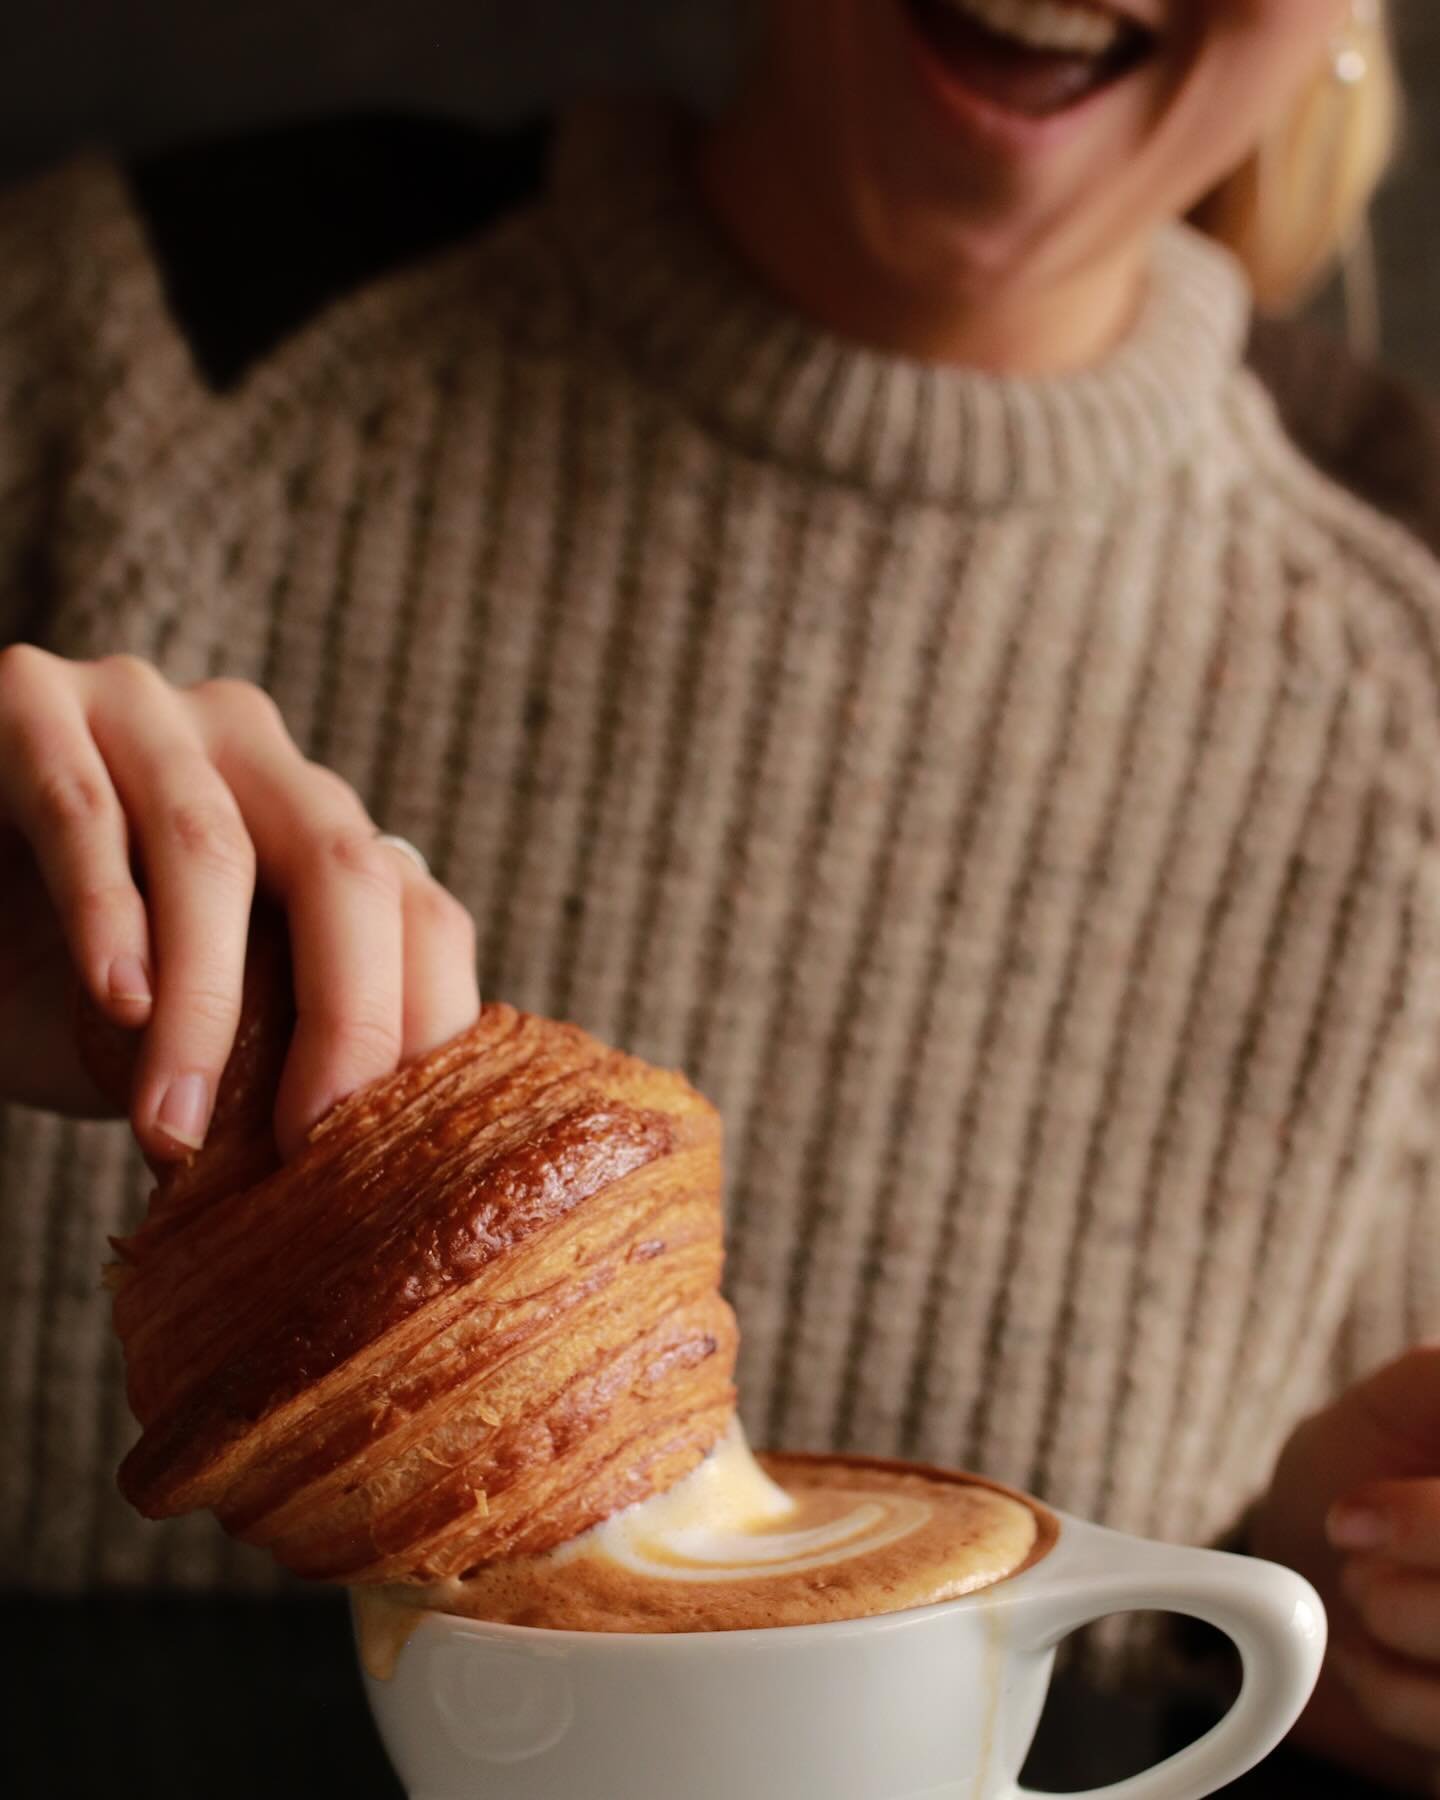 Ah it&rsquo;s Saturday! Saturdays are all about smiles, good vibes&hellip;and dunking a delicious buttery croissant in your Mountain Dweller coffee 🥐☕️ 

💫 What&rsquo;s your favorite Saturday vibe?